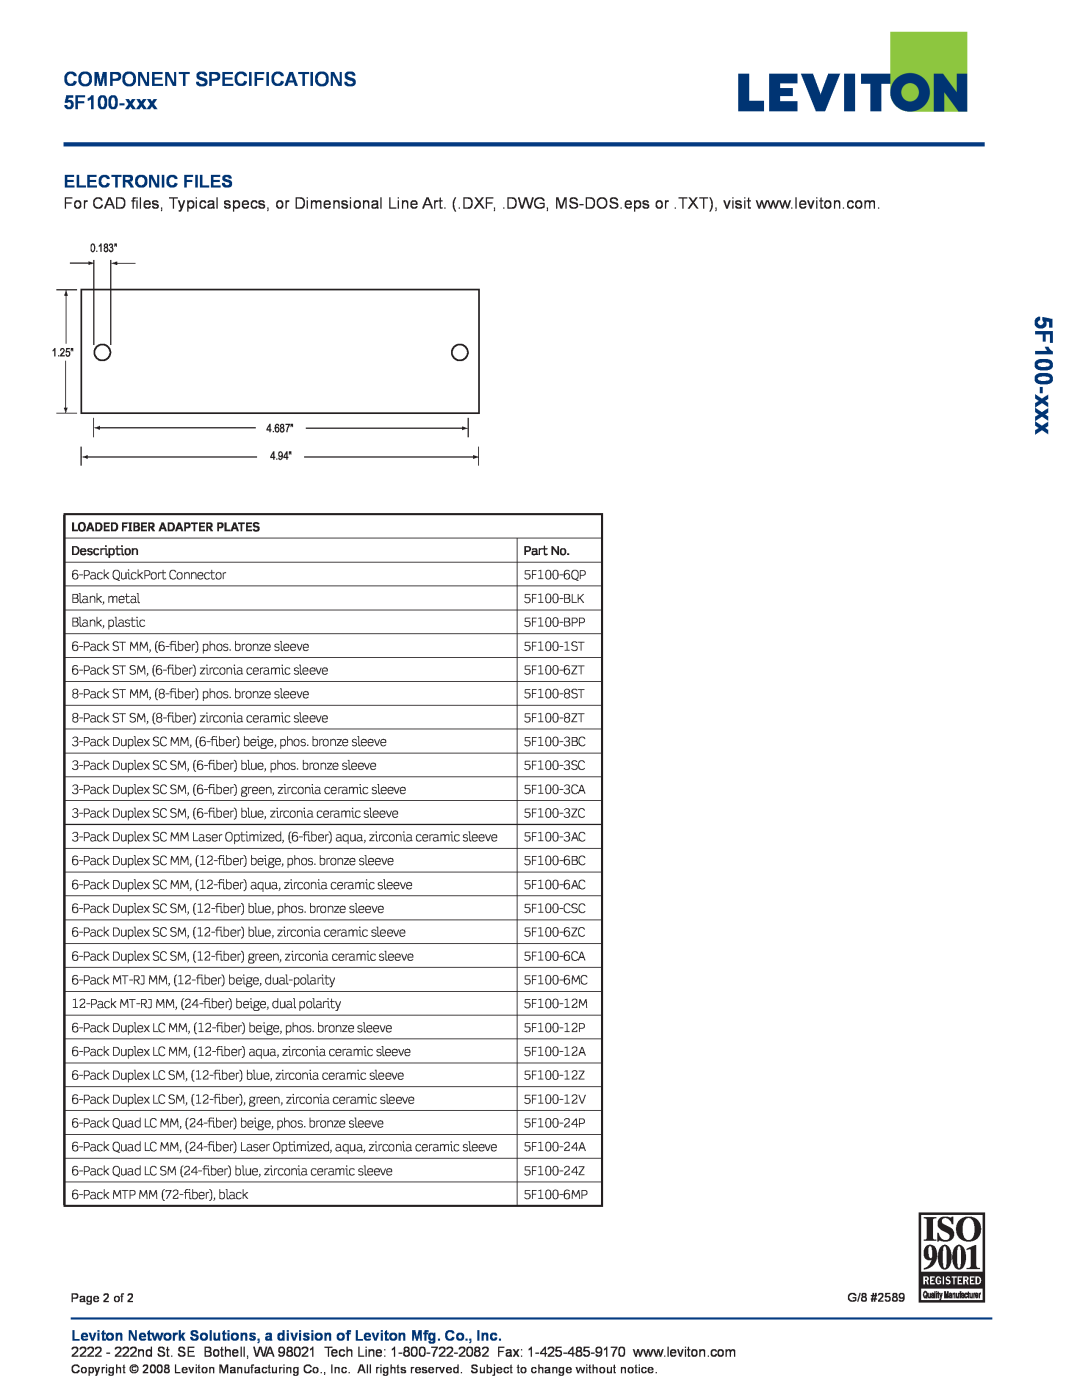 Leviton warranty Electronic Files, COMPONENT SPECIFICATIONS 5F100-xxx, Loaded Fiber Adapter Plates 